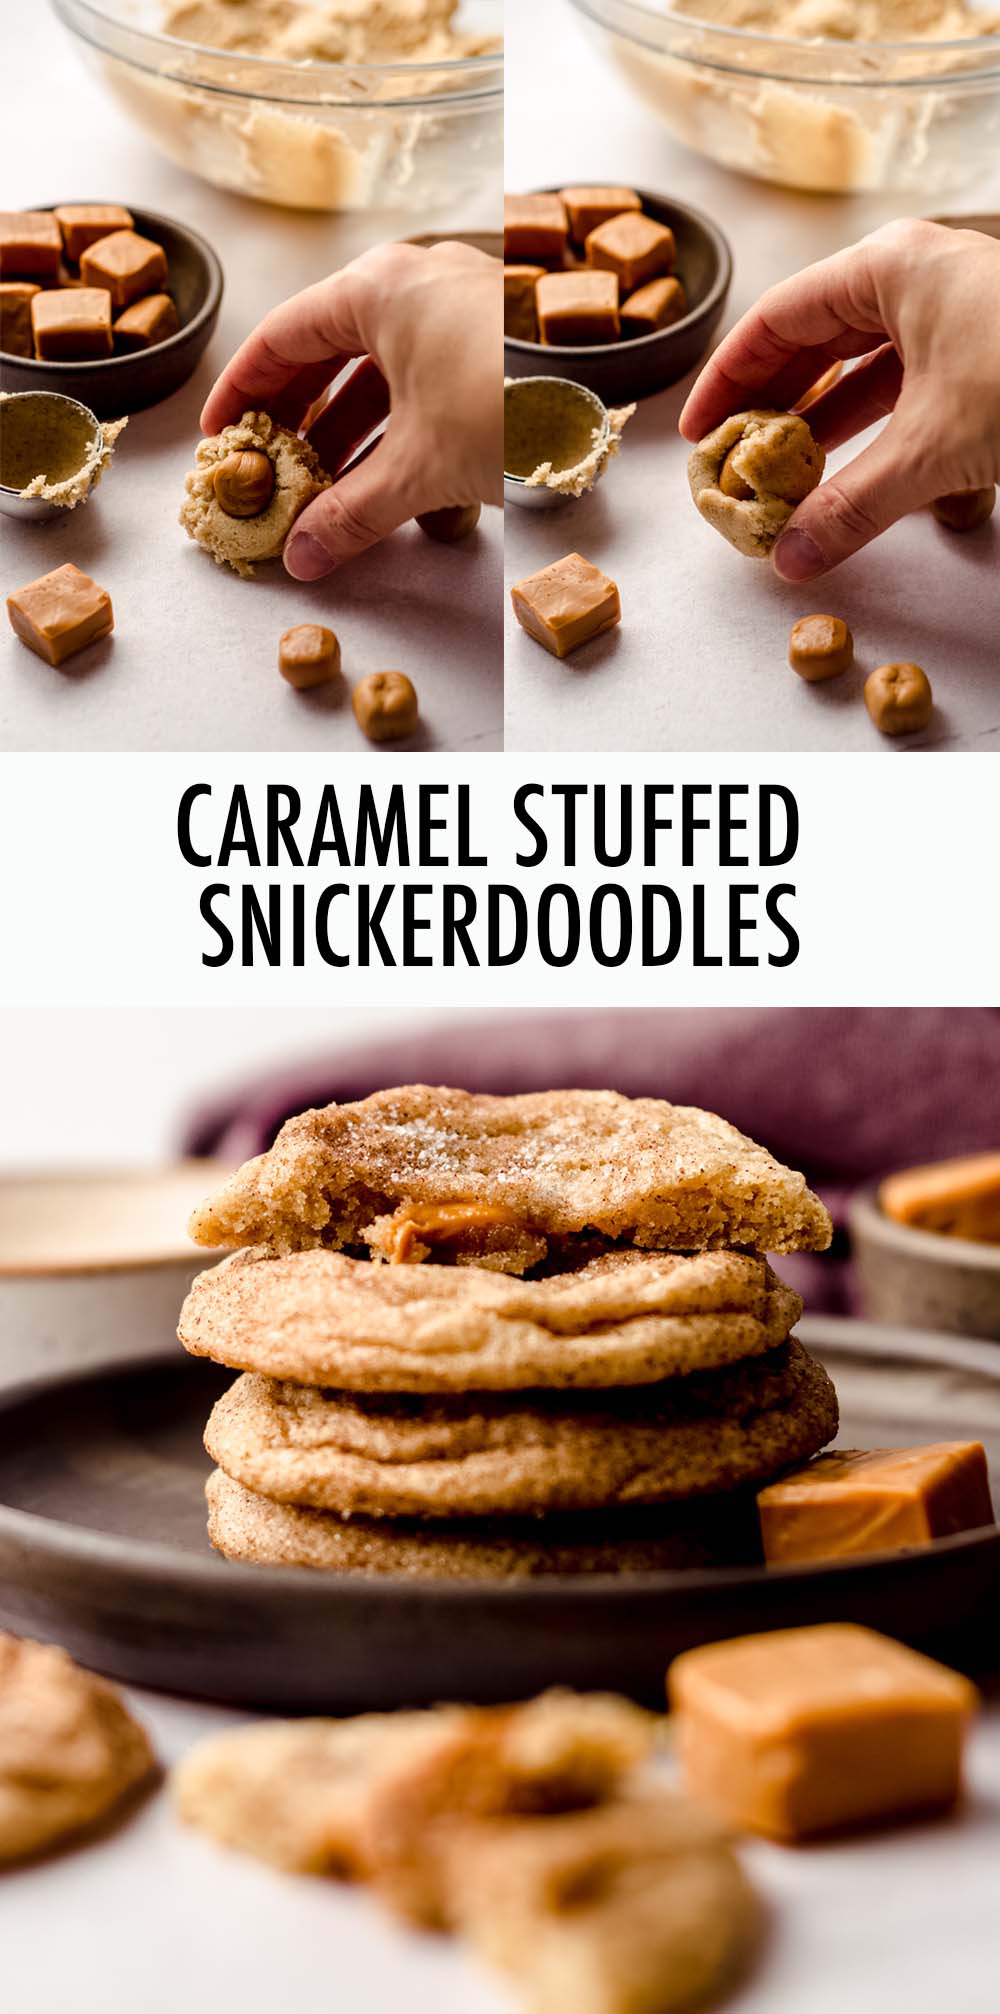 Classic snickerdoodle cookies stuffed with caramel and sprinkled with sea salt. A jazzy upgrade for the sweet and salty lovers of the cookie world! via @frshaprilflours